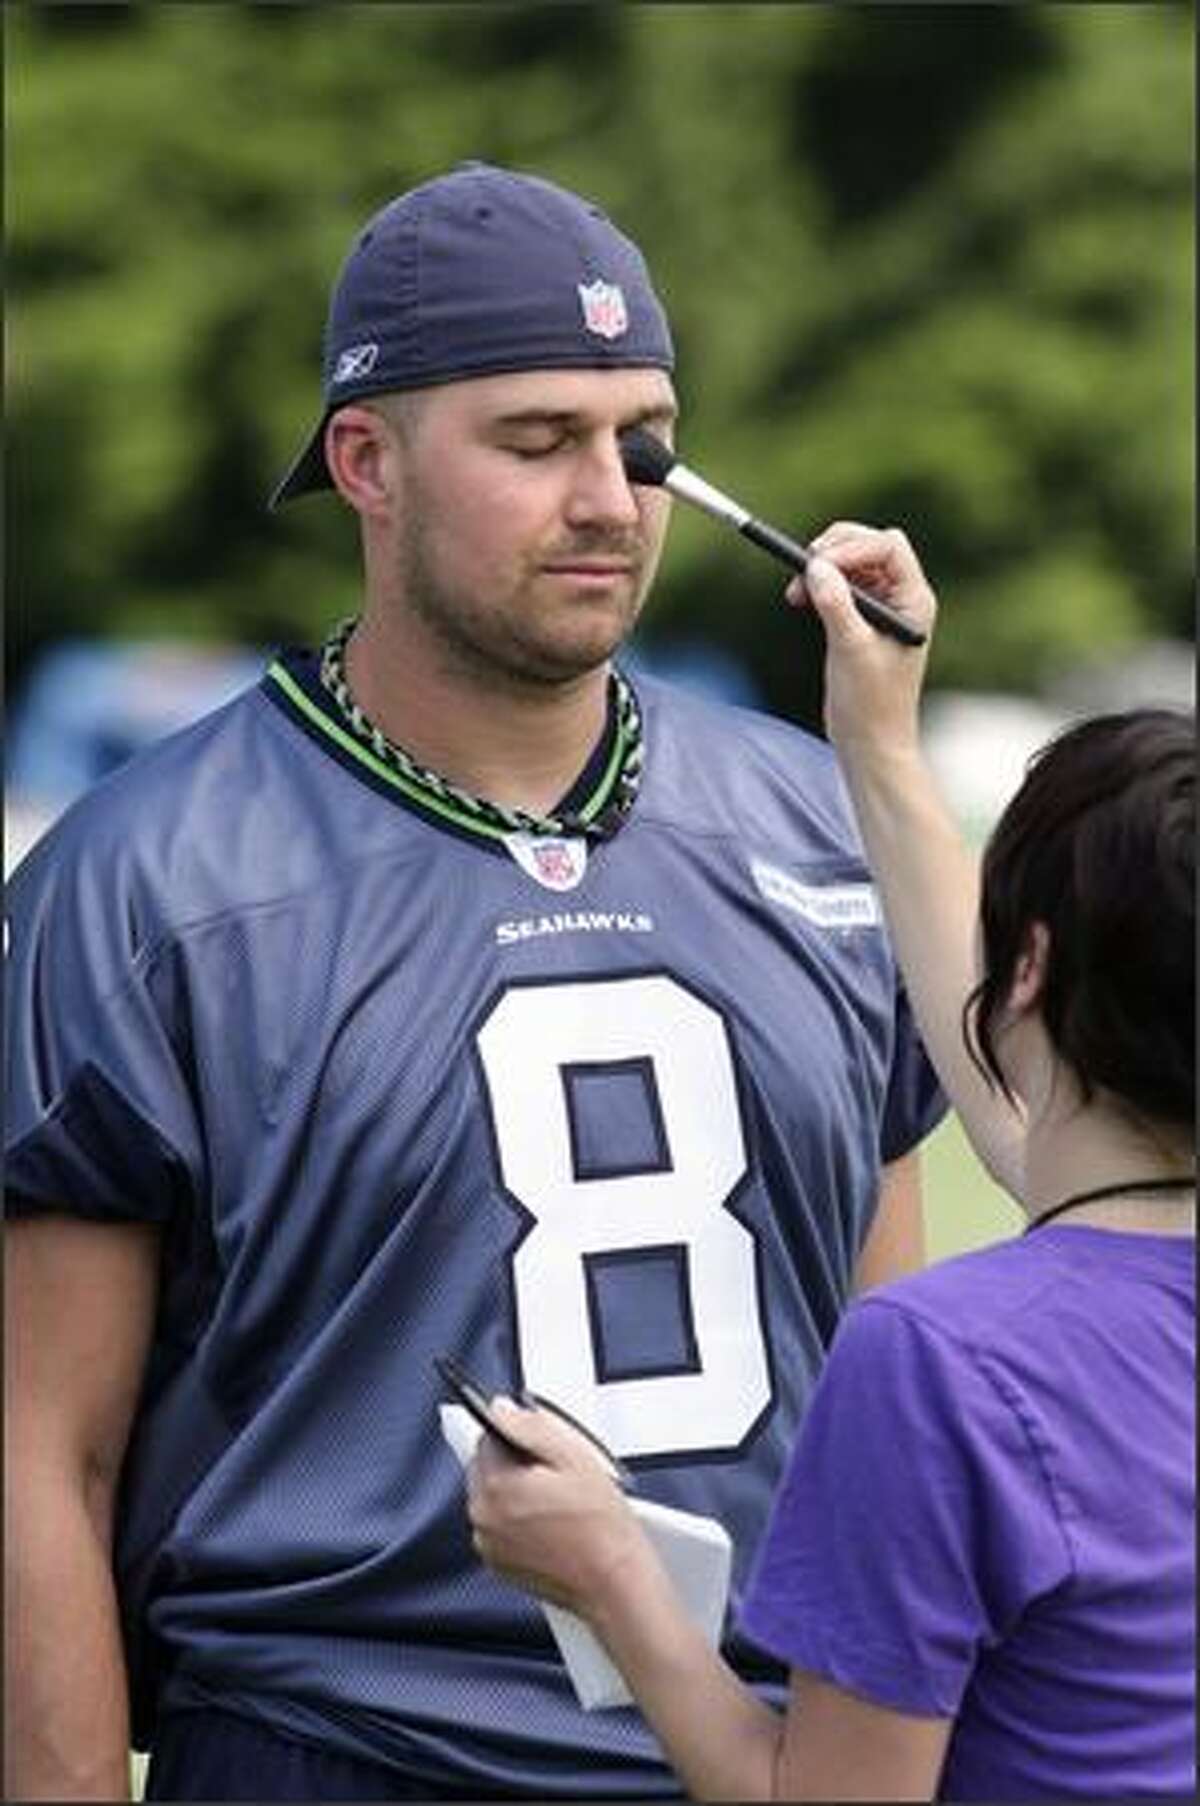 Quarterback Matt Hasselbeck has makeup applied prior to the photo shoot by artist Christine Cherbonnier.